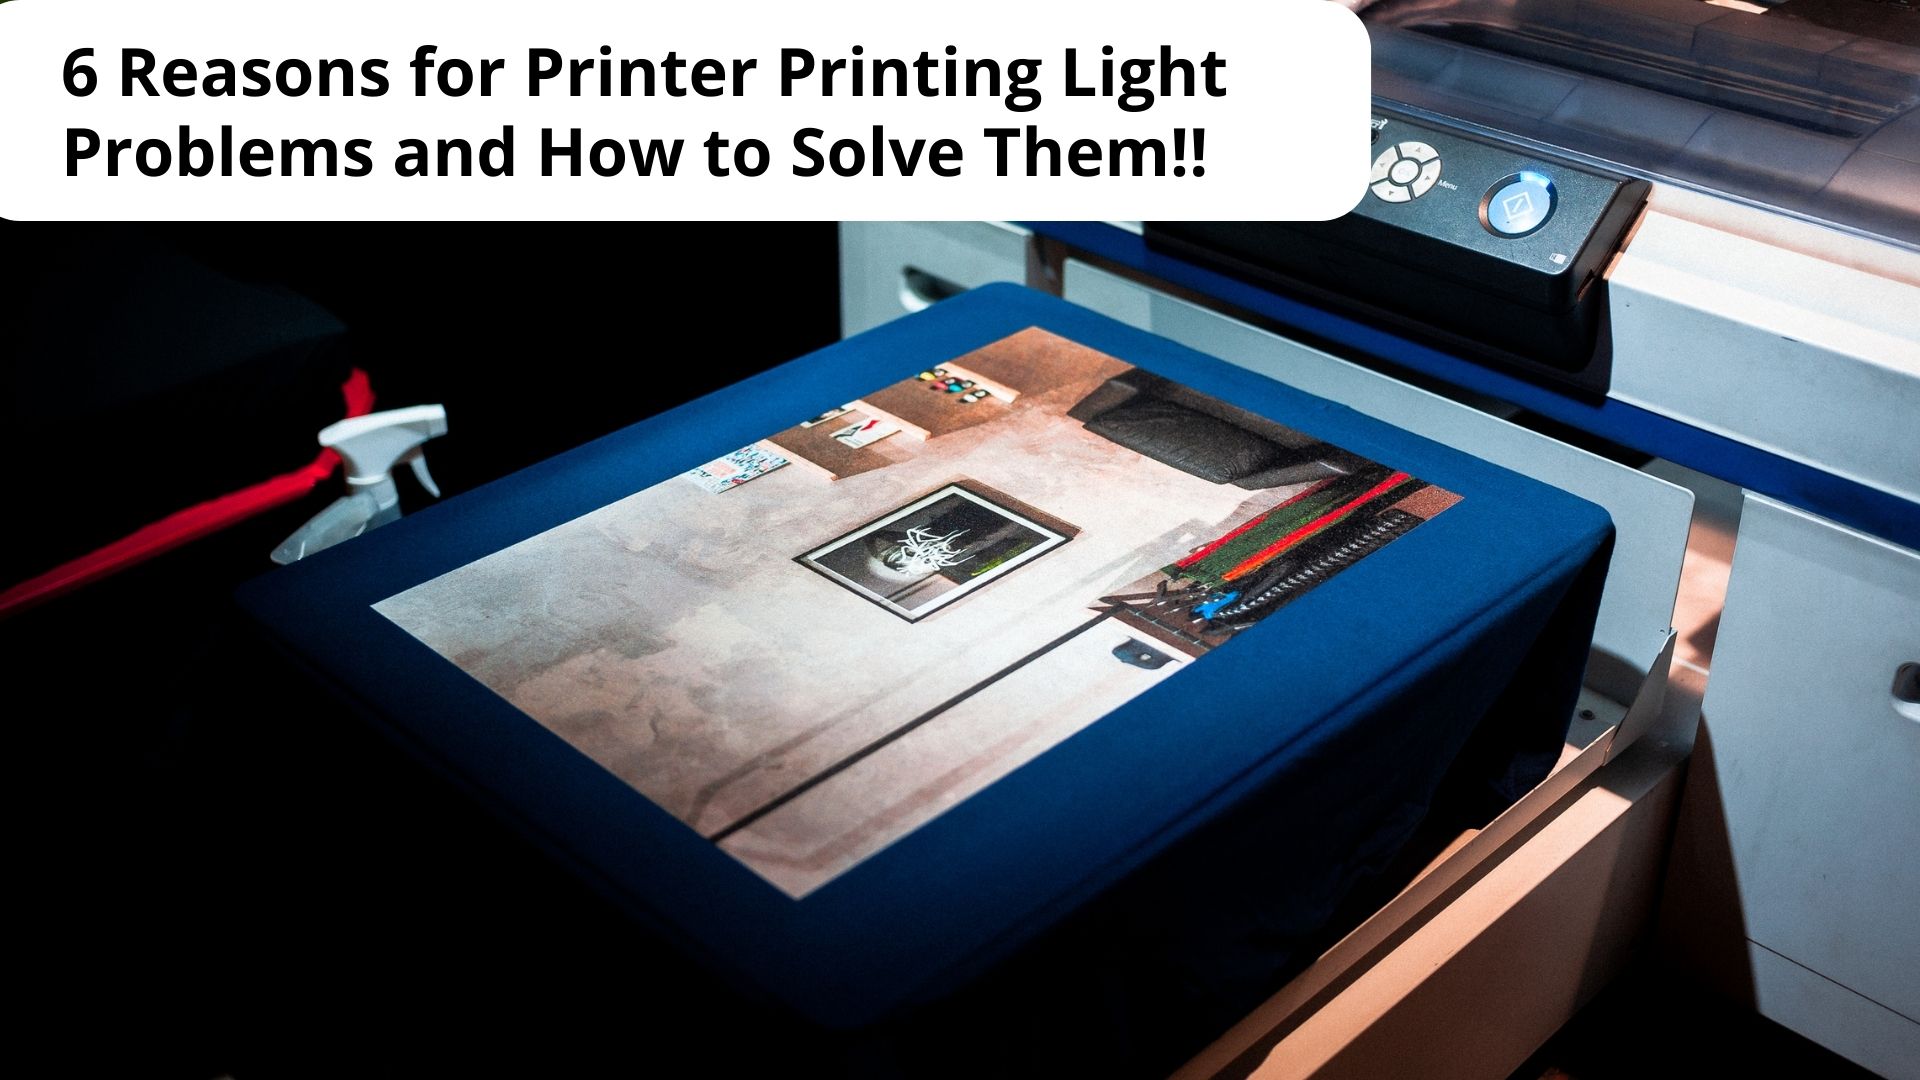 6 Reasons for Printer Printing Light Problems and How to Solve Them!!